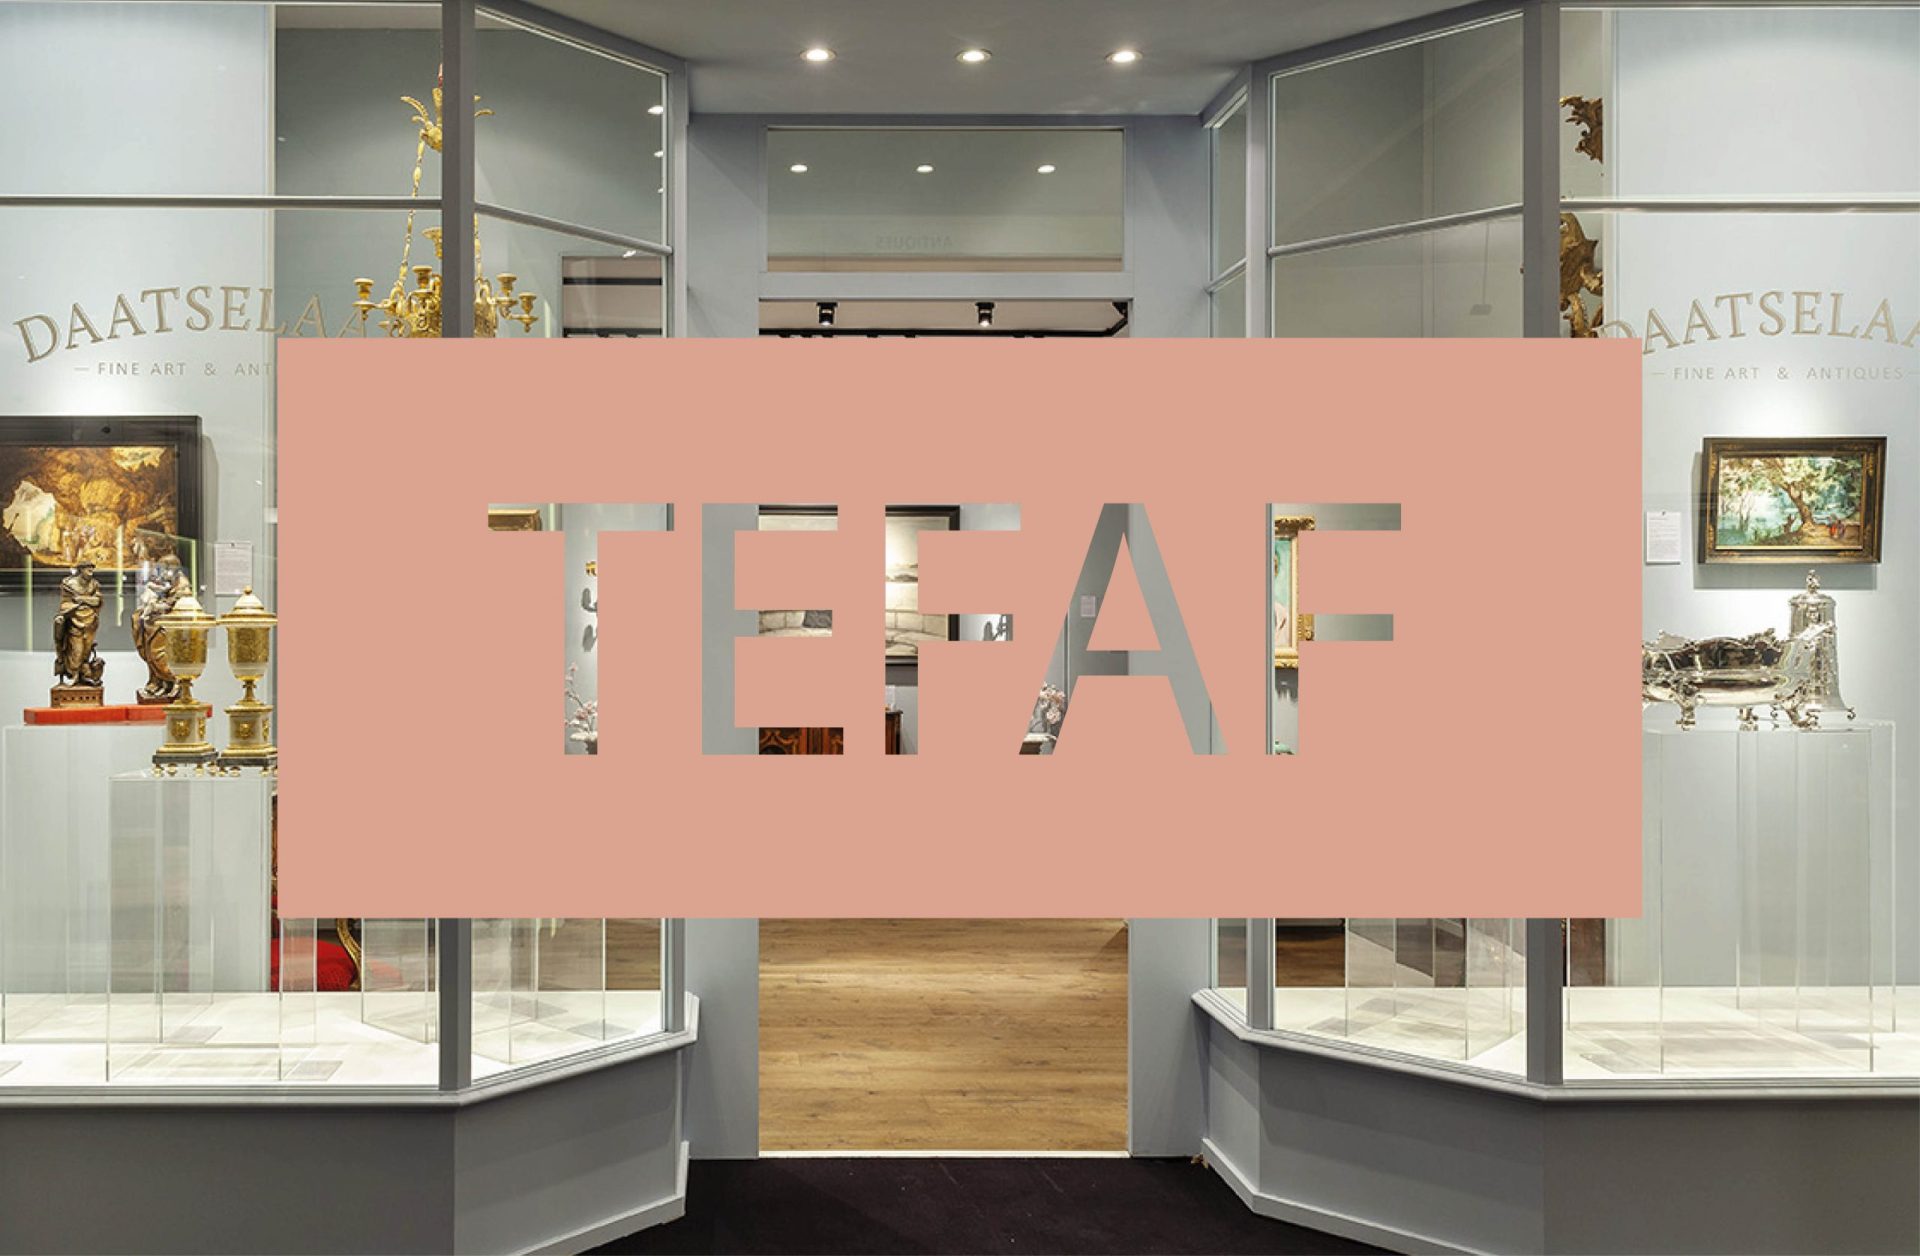 TEFAF MAASTRICHT IS COMING. FINE ART & ANTIQUES AT SPECTACULAR DISPLAY!